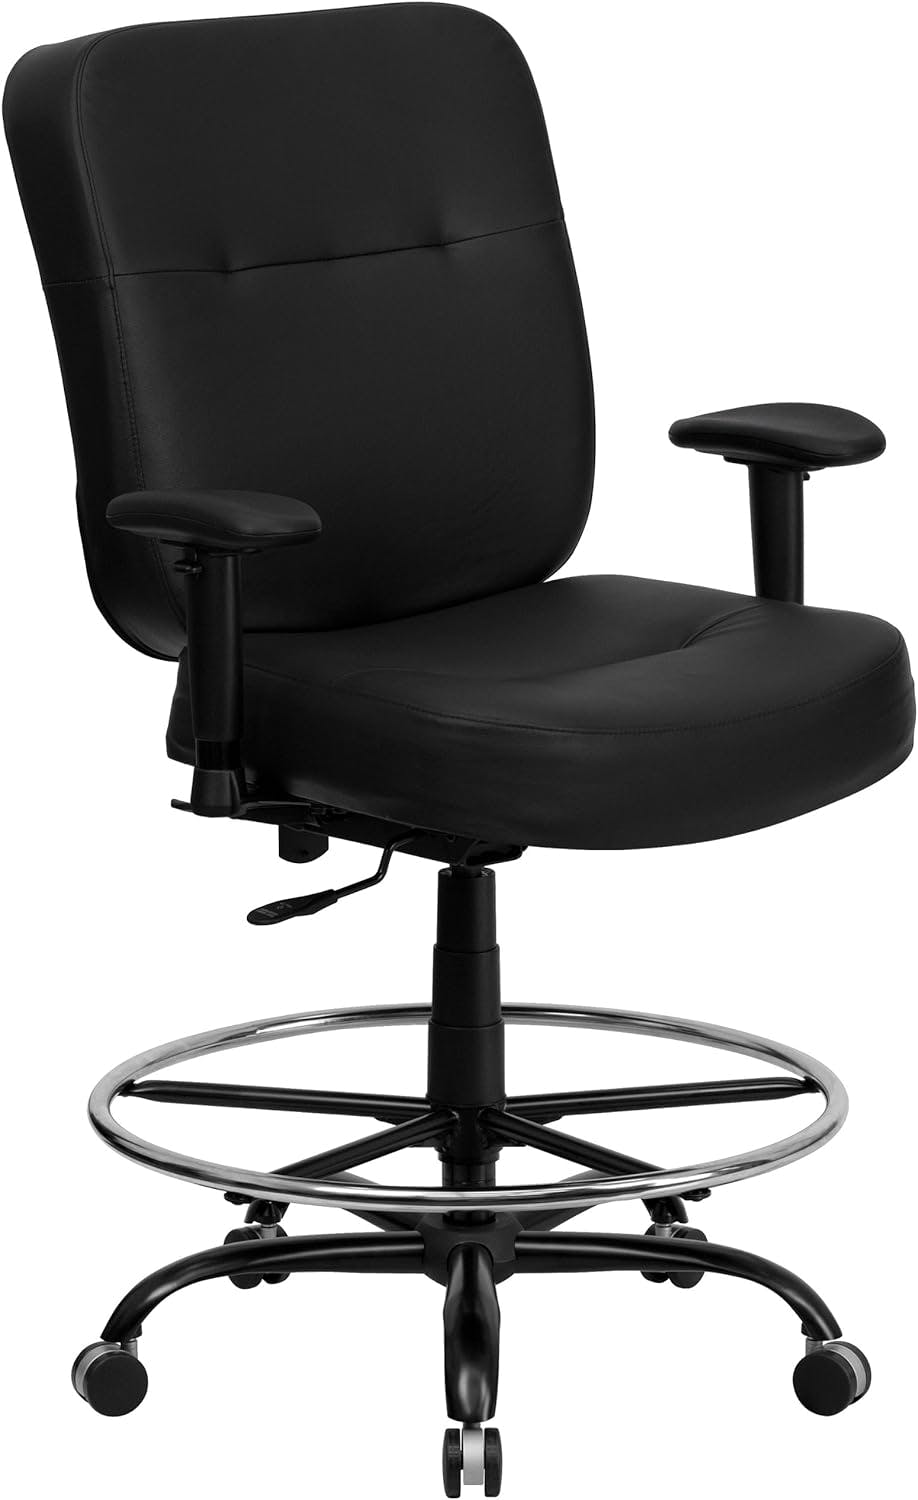 ErgoFlex 360° Black LeatherSoft High-Back Drafting Chair with Metal Base